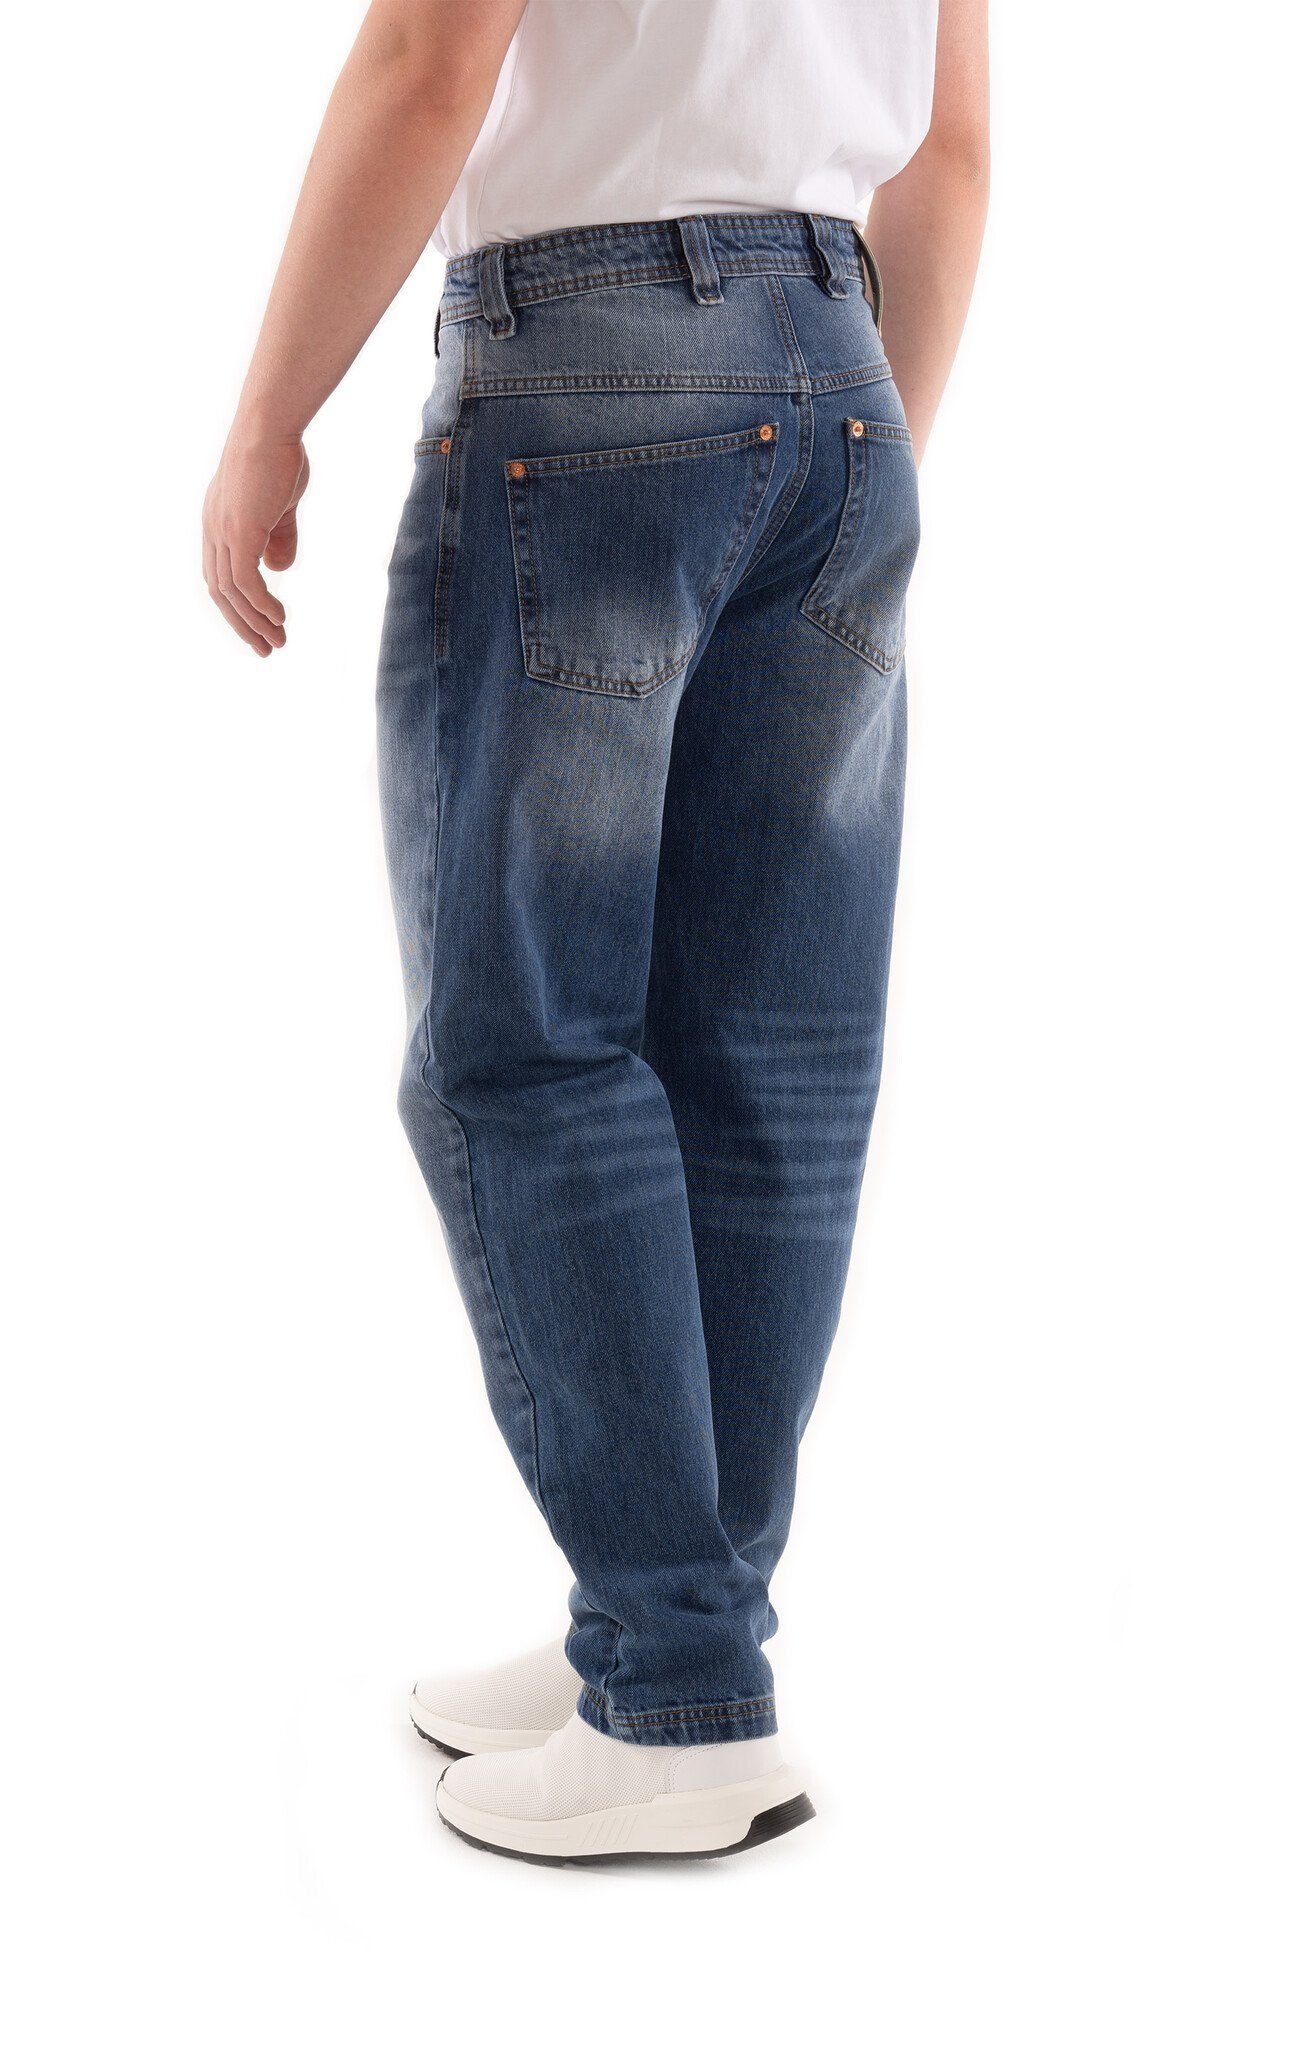 Relaxed Weite Loose Fit 472 Fit, PICALDI Zicco Jeans Montenegro Jeans